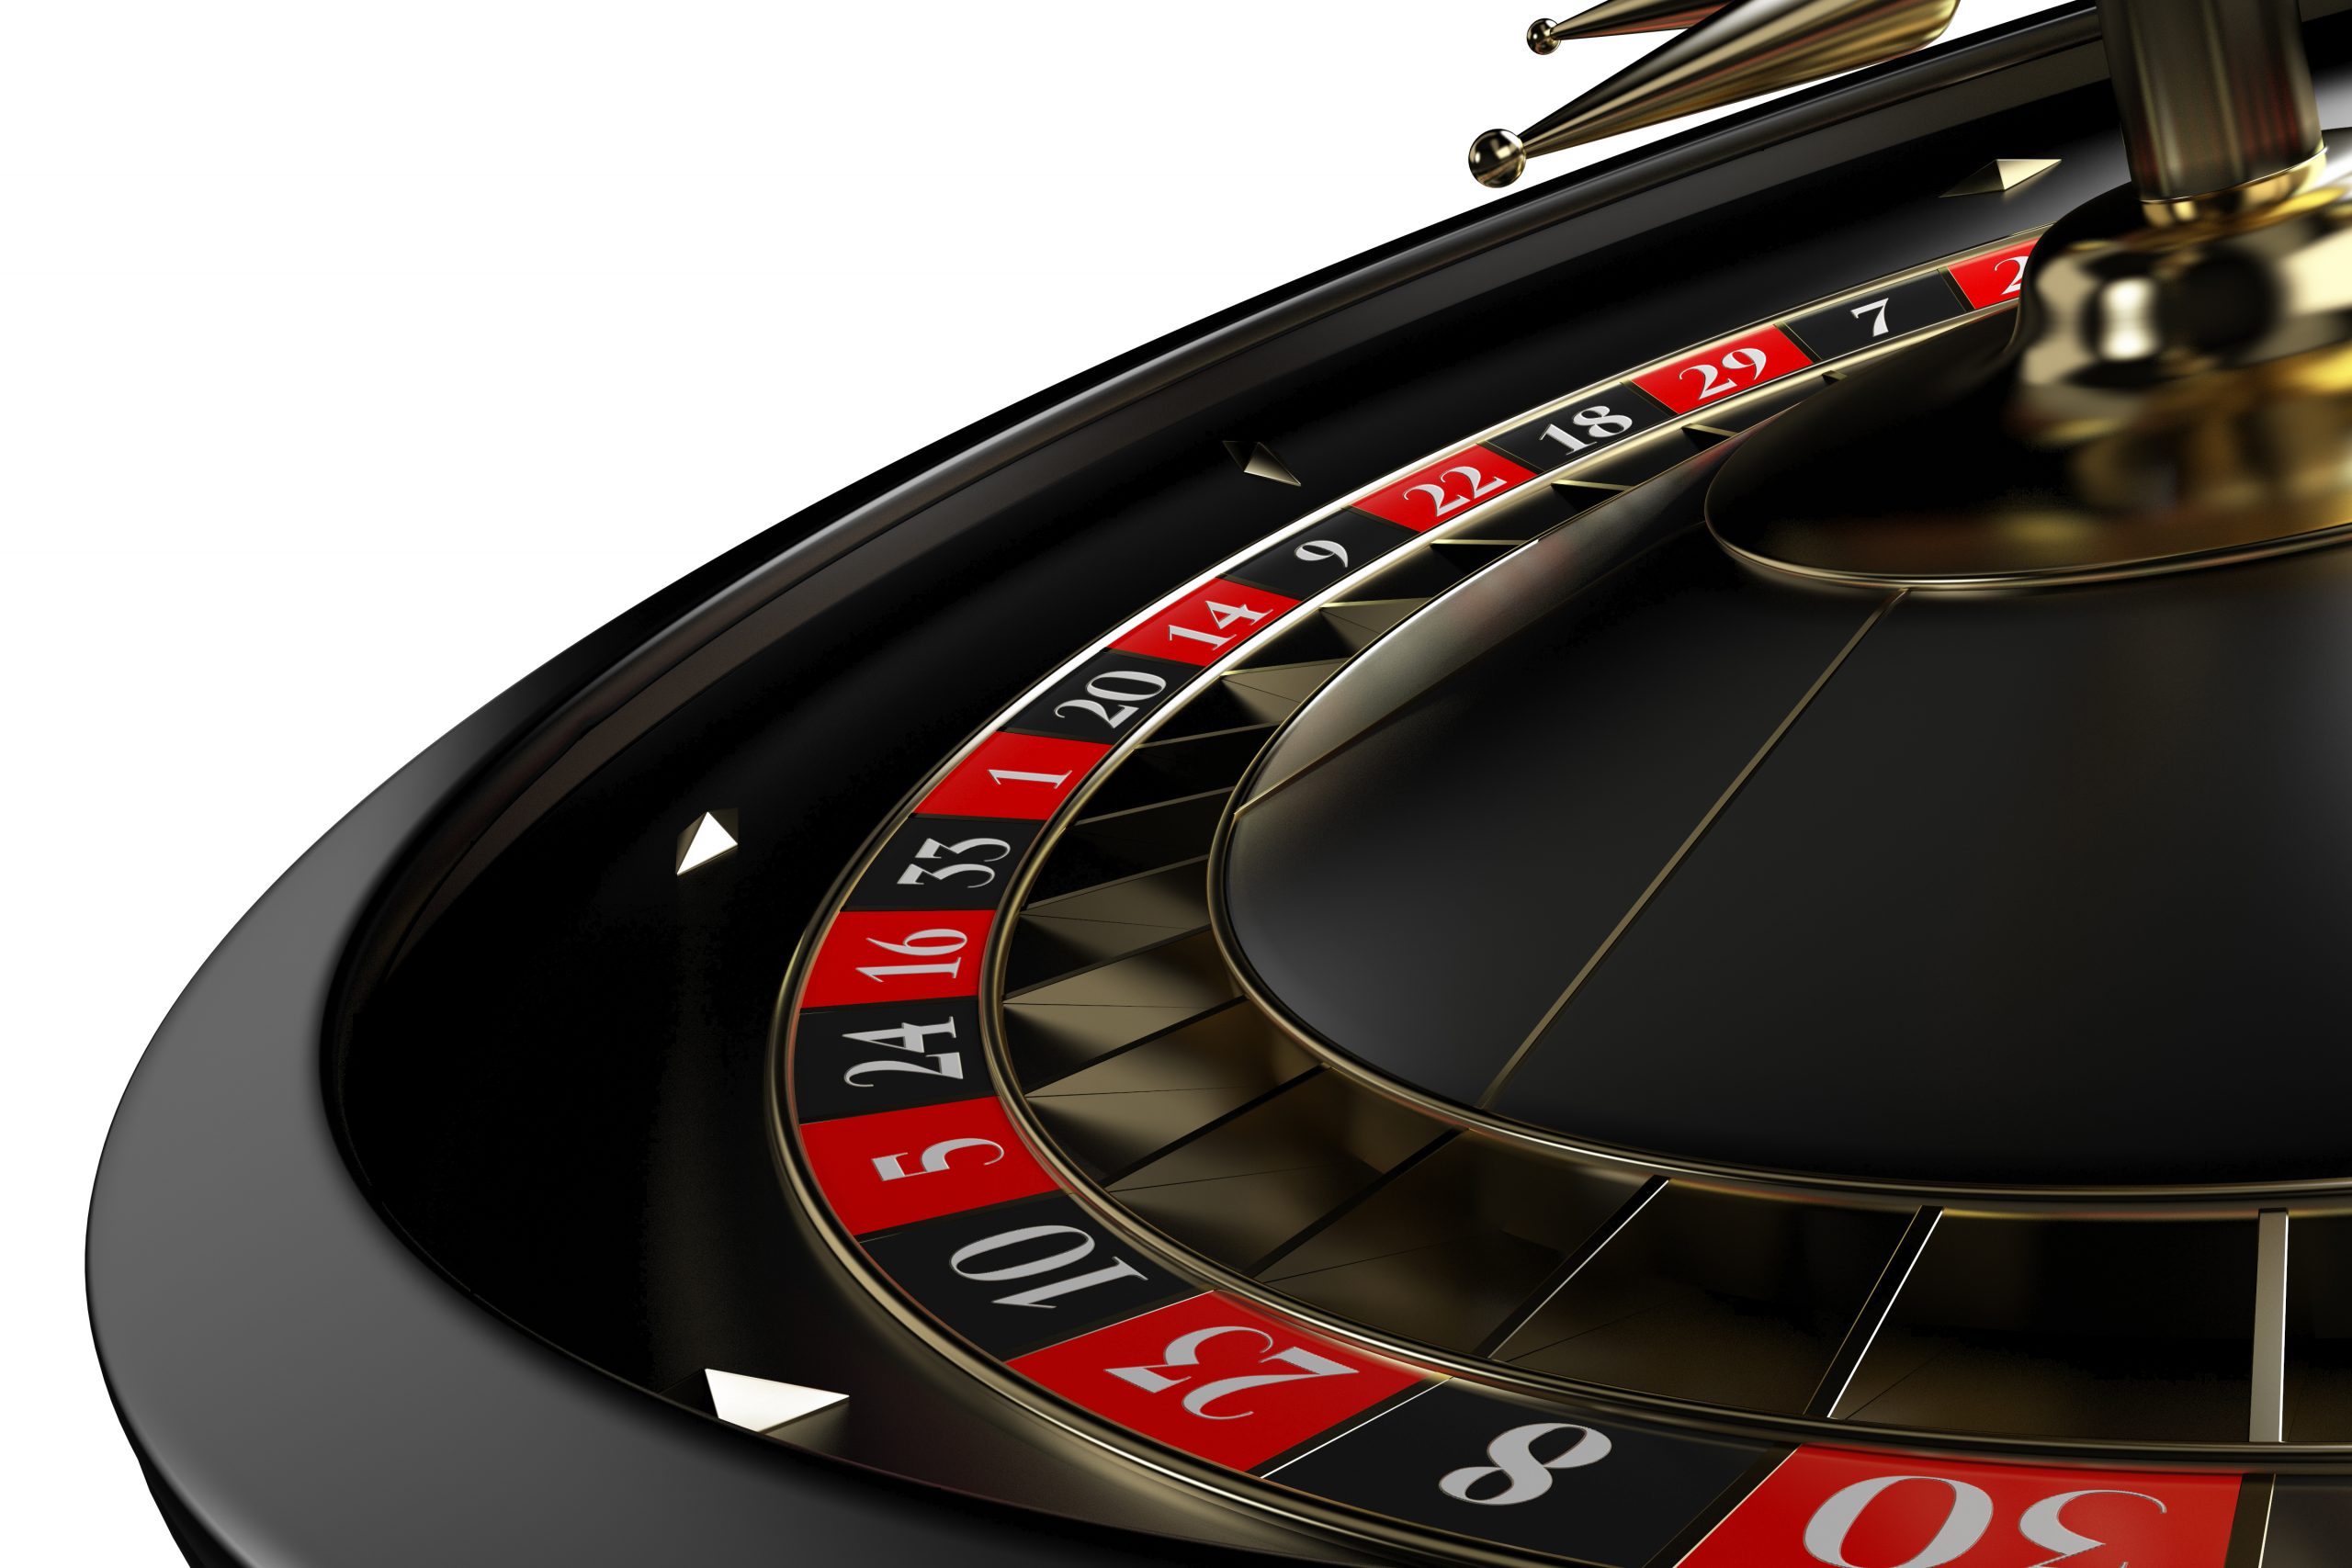 The Best Online Casino Betting Sites for Table Game Fans